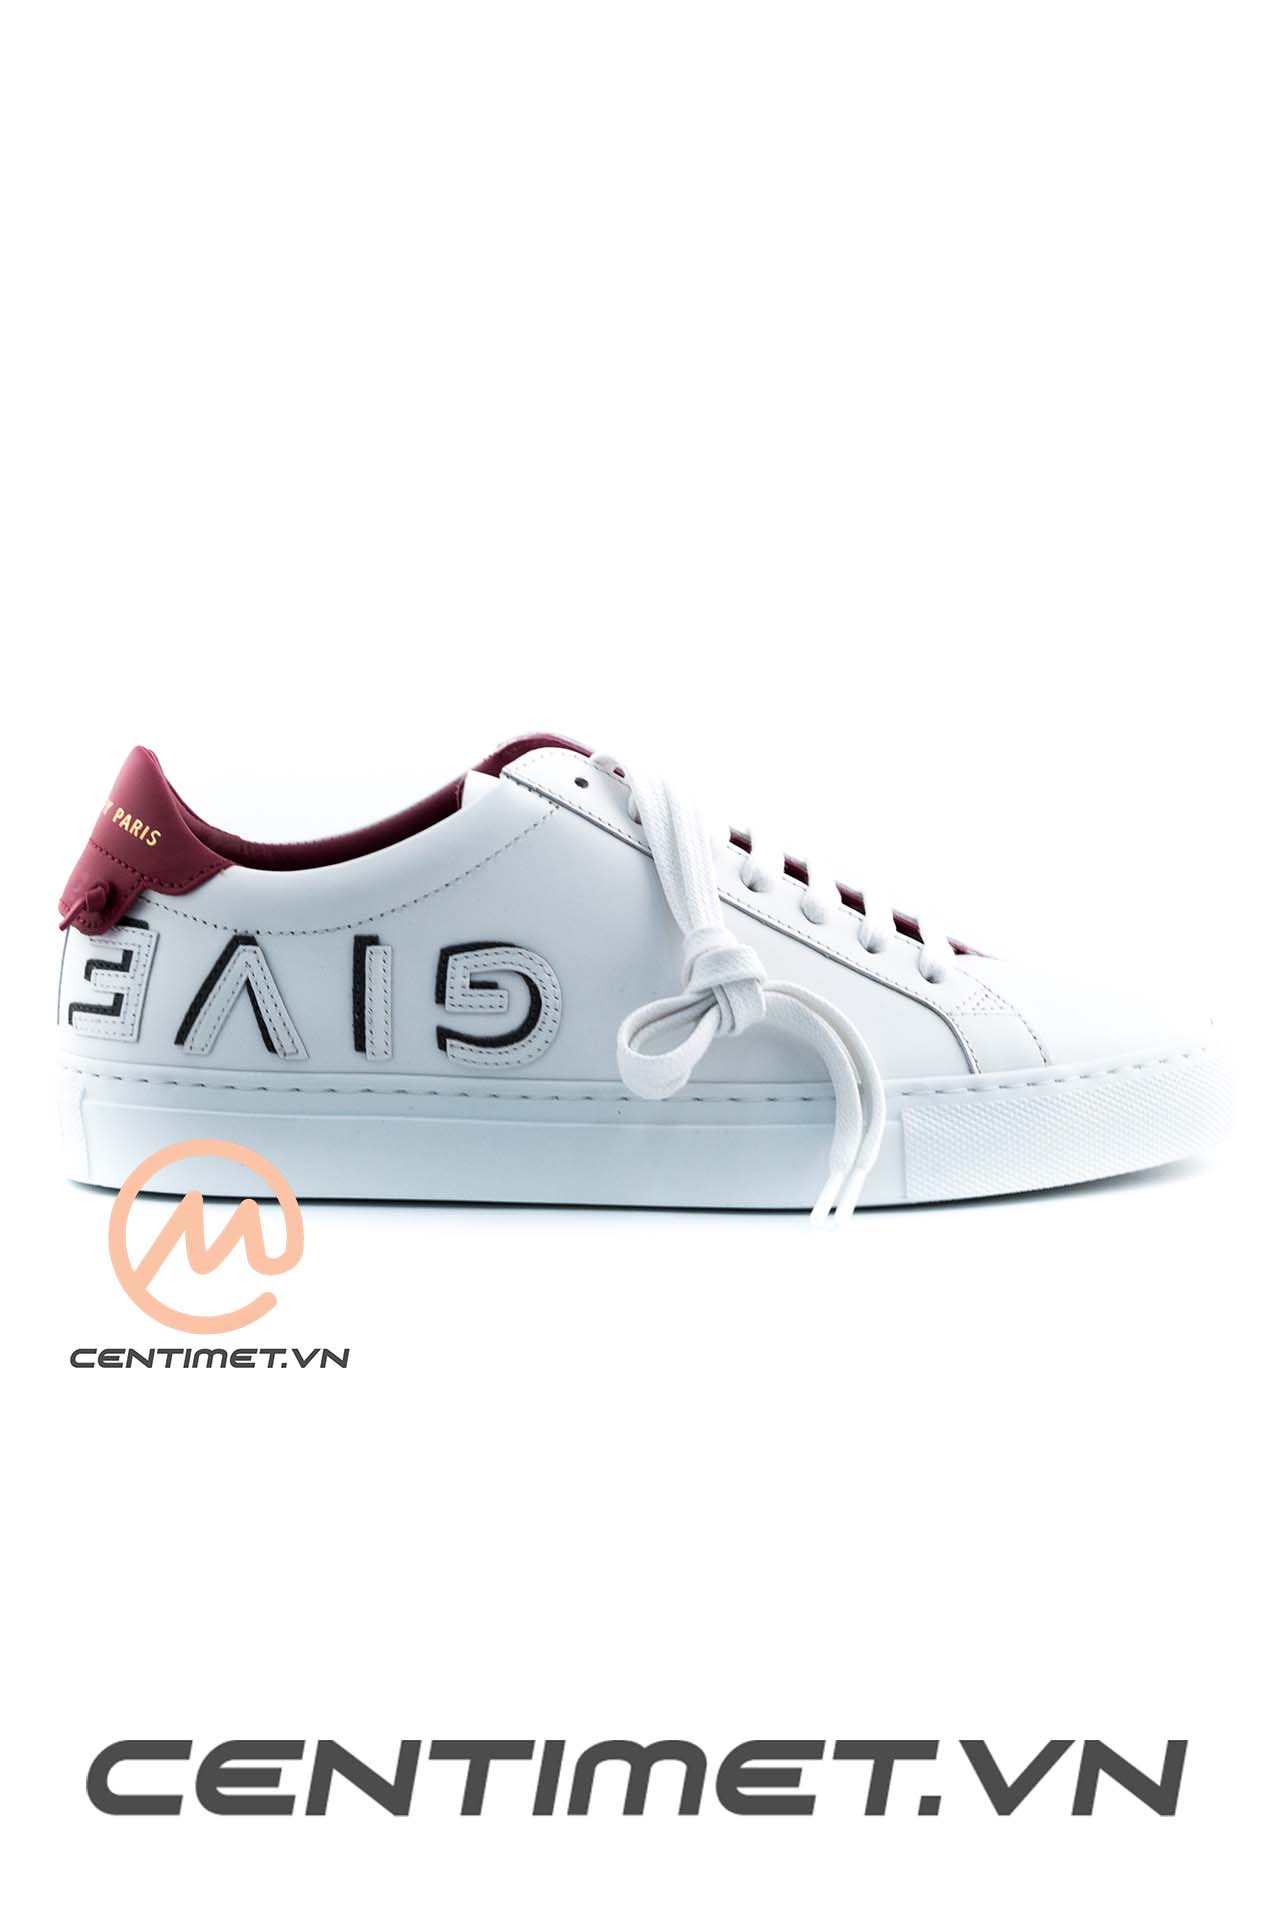 Giay Givenchy Urban Knots sneaker (6 of 38)